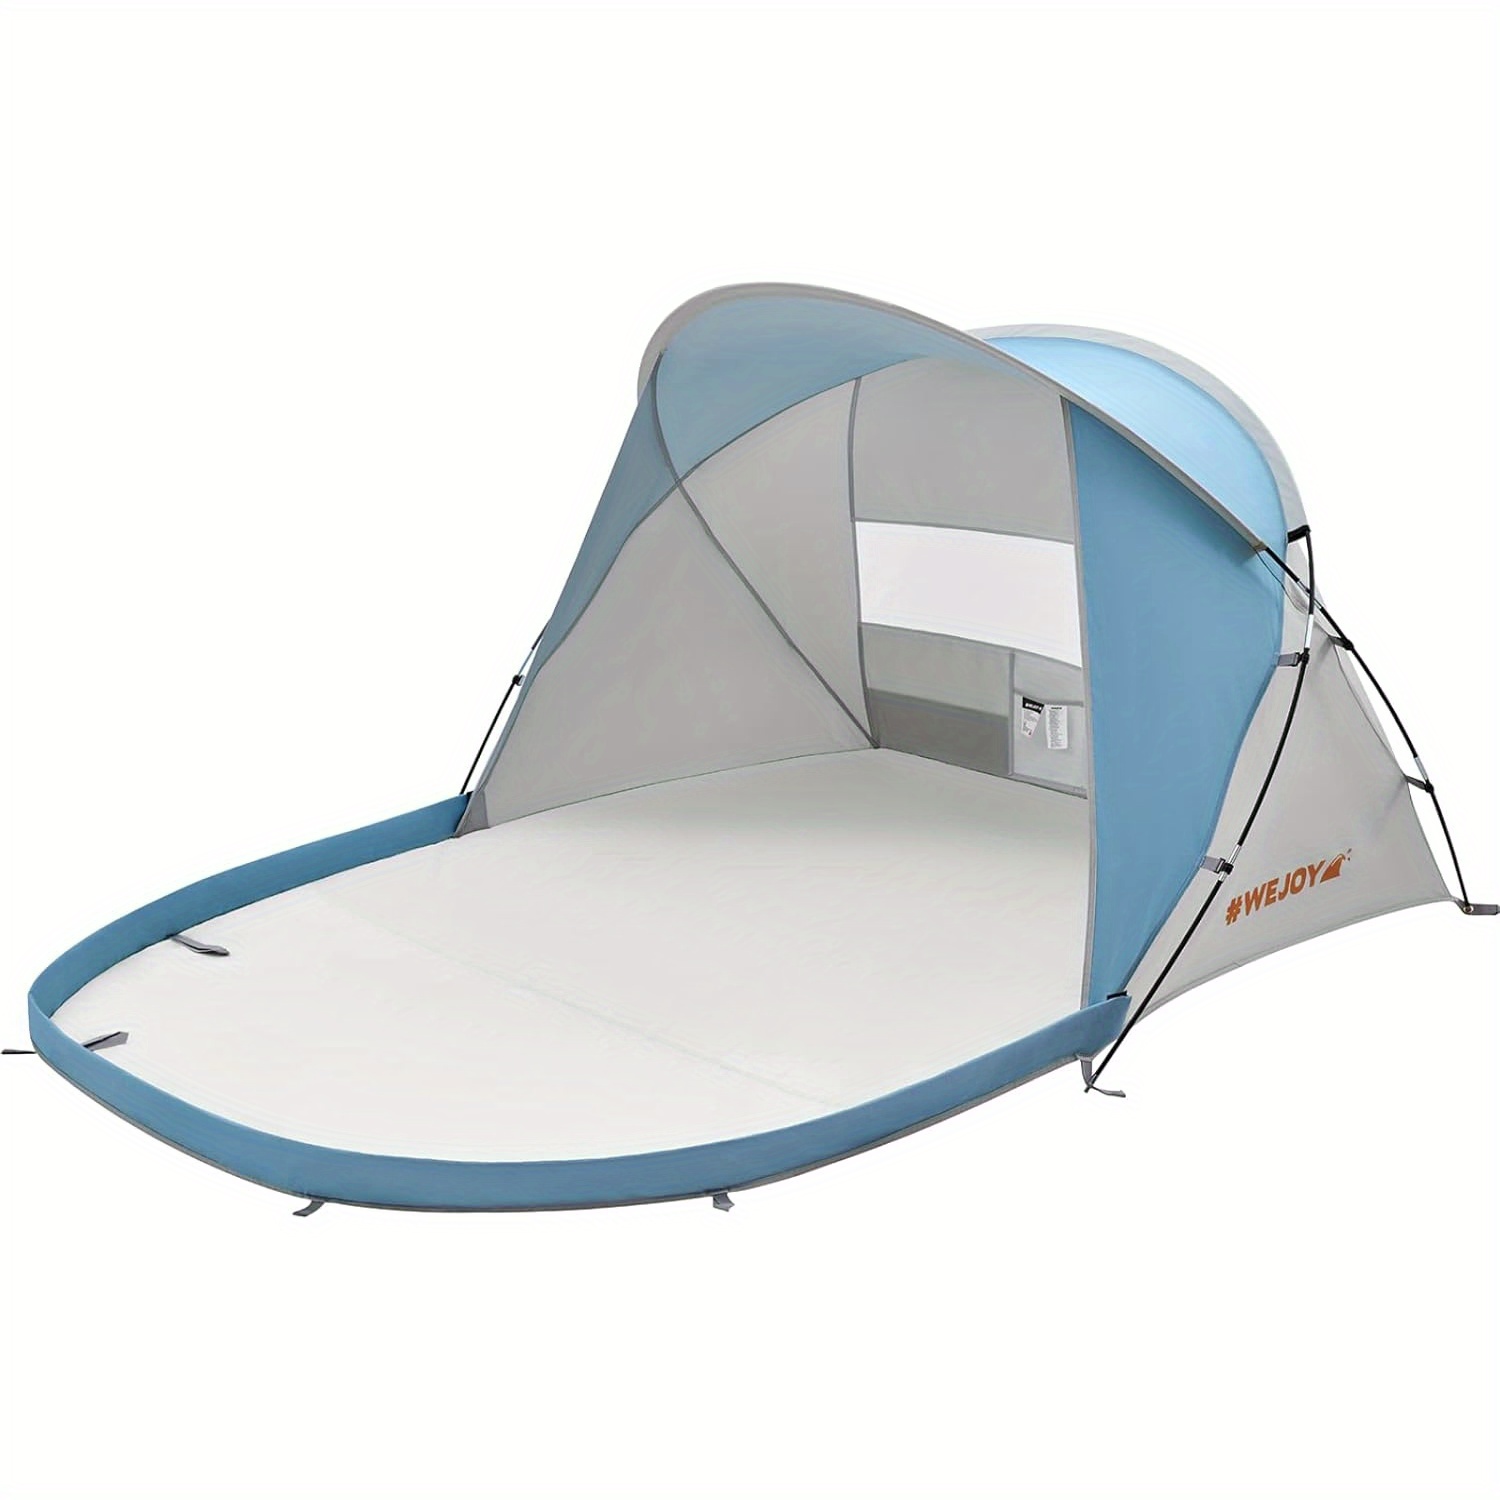 

Beach Tent Awning Uv Protection Upf50+ Simple Setting Beach Awning Sunshade Lamp Portable Camping Awning, Suitable For 3 Adults For Sand, Picnic, Park, Camping, Lawn